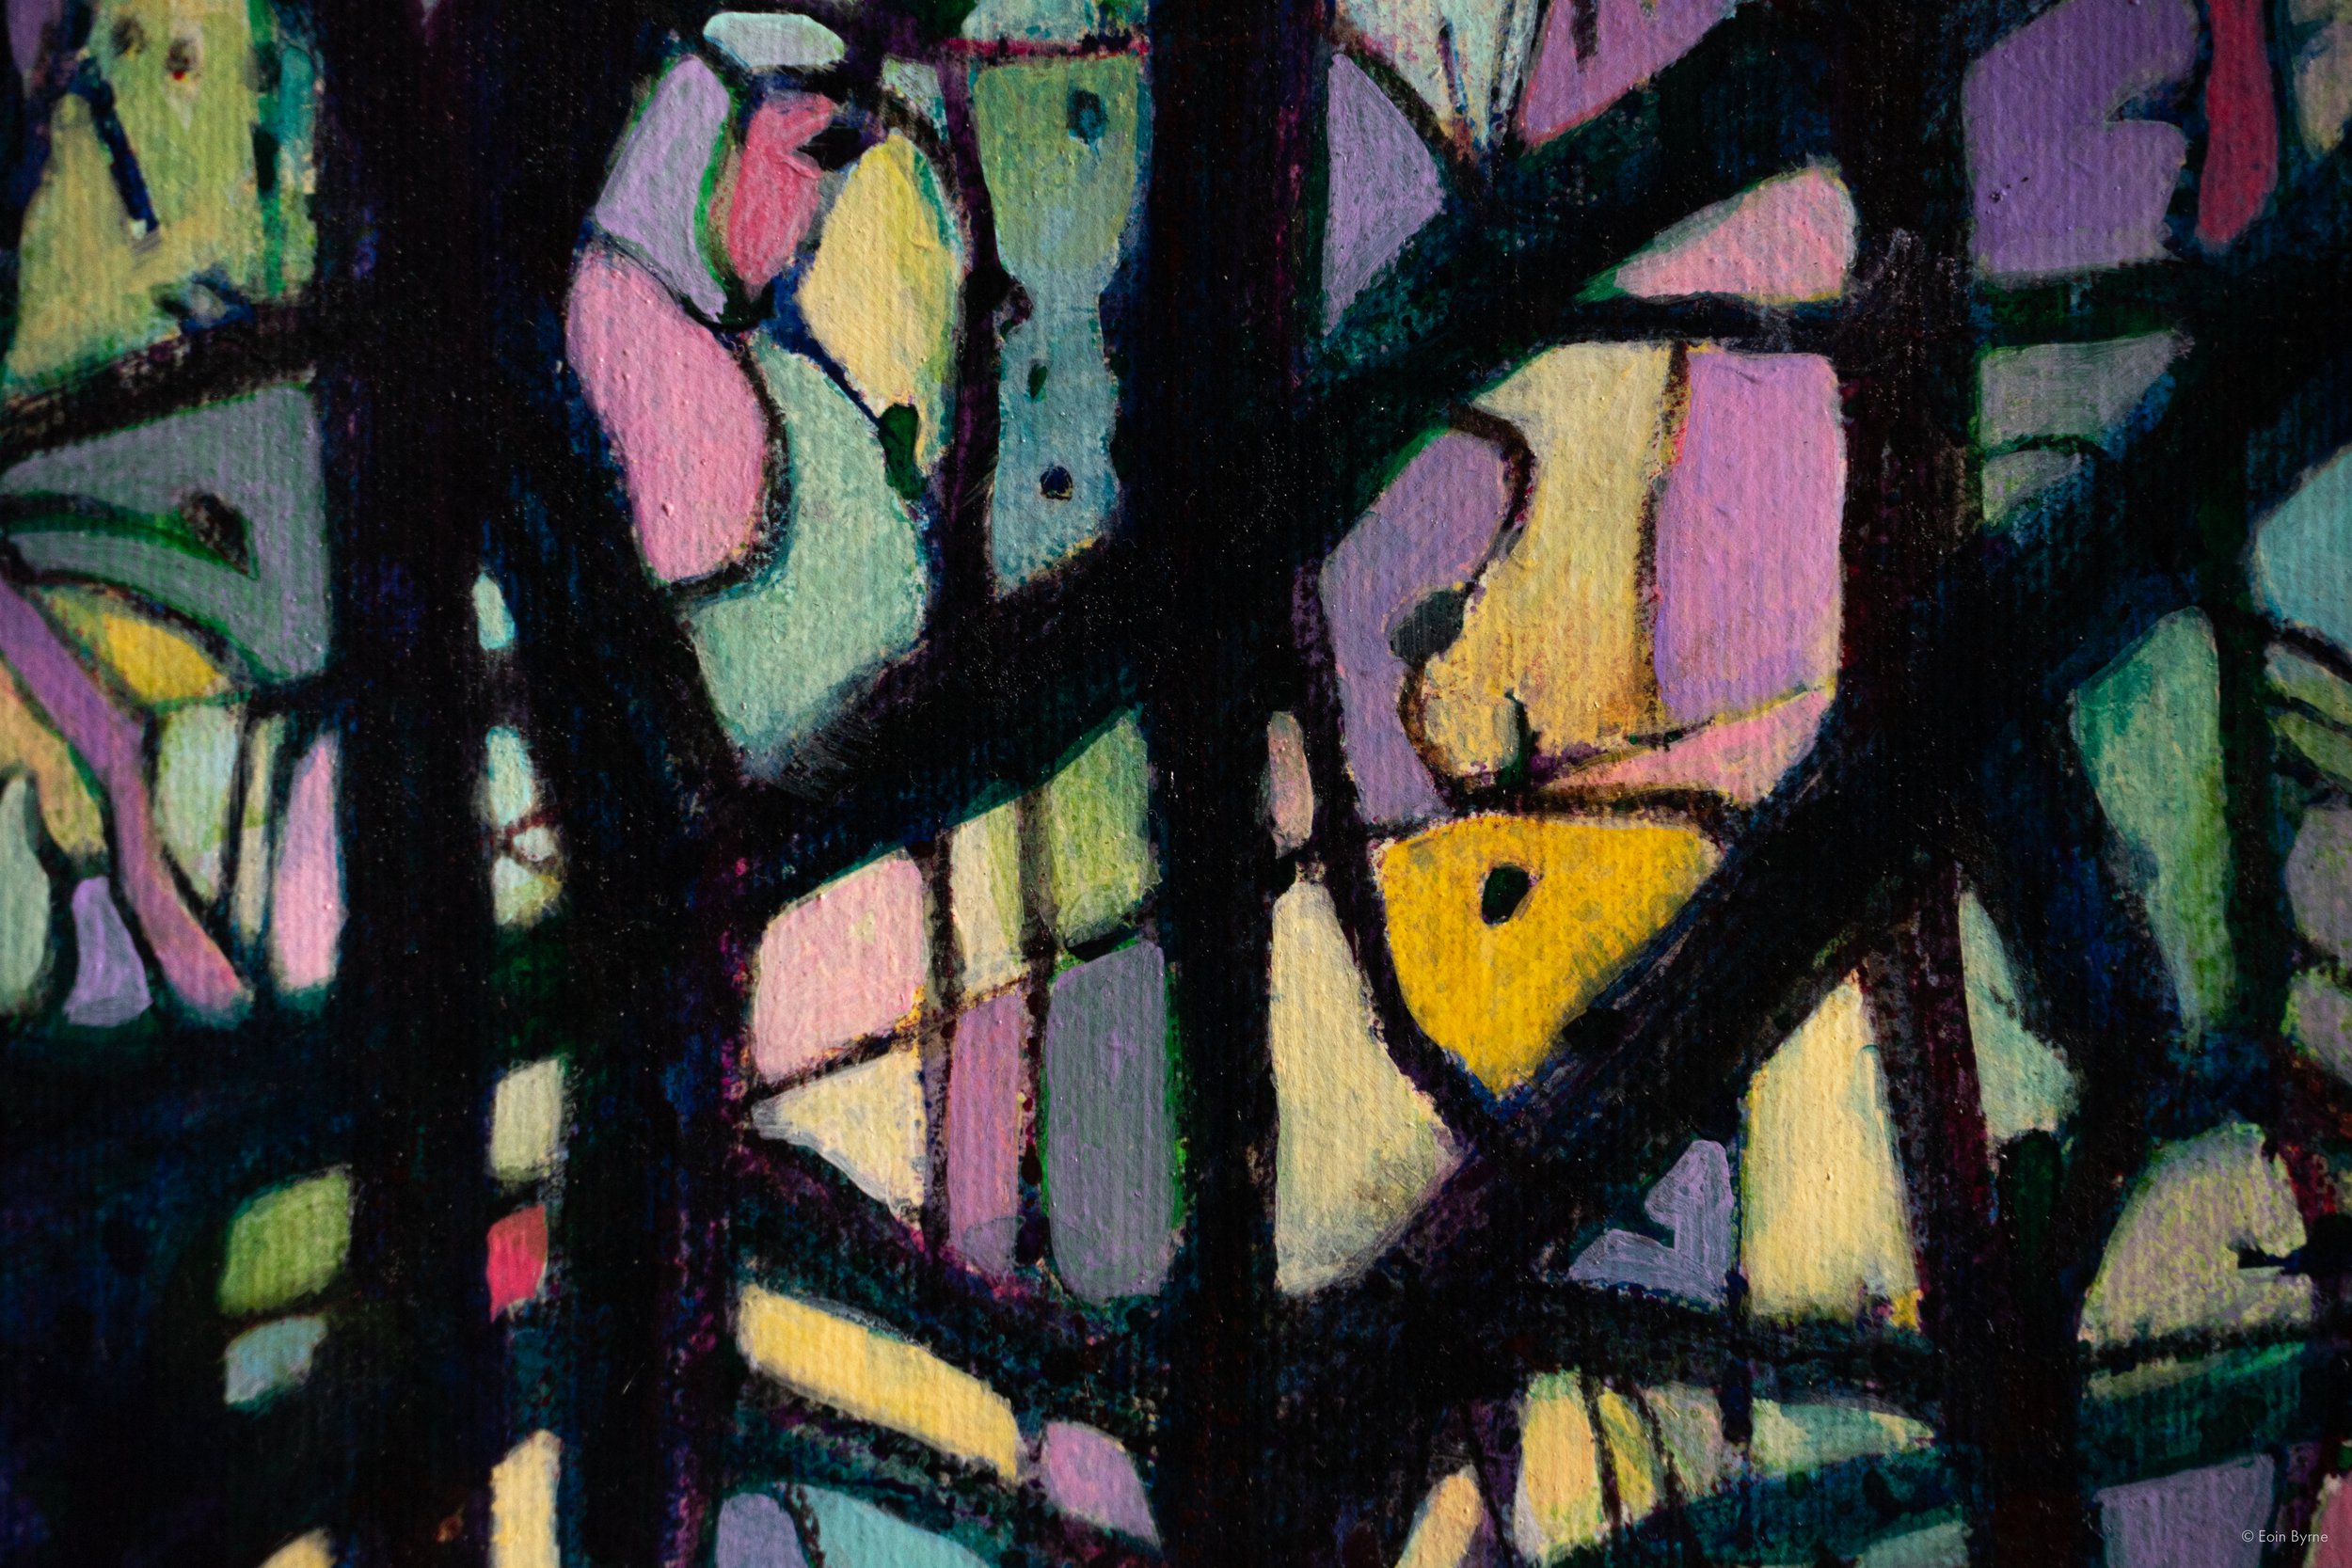 "Looking up through trees" (detail 1)